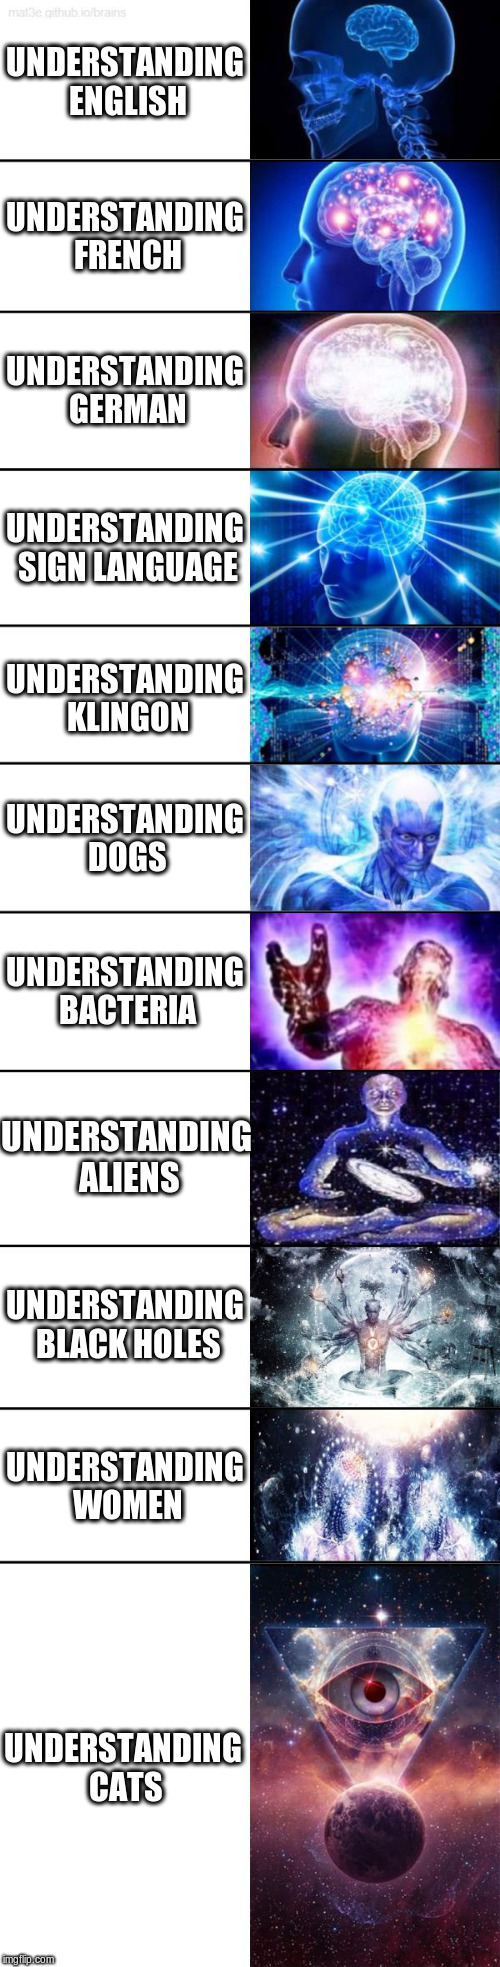 Extended Expanding Brain | UNDERSTANDING ENGLISH; UNDERSTANDING FRENCH; UNDERSTANDING GERMAN; UNDERSTANDING SIGN LANGUAGE; UNDERSTANDING KLINGON; UNDERSTANDING DOGS; UNDERSTANDING BACTERIA; UNDERSTANDING ALIENS; UNDERSTANDING BLACK HOLES; UNDERSTANDING WOMEN; UNDERSTANDING CATS | image tagged in extended expanding brain | made w/ Imgflip meme maker